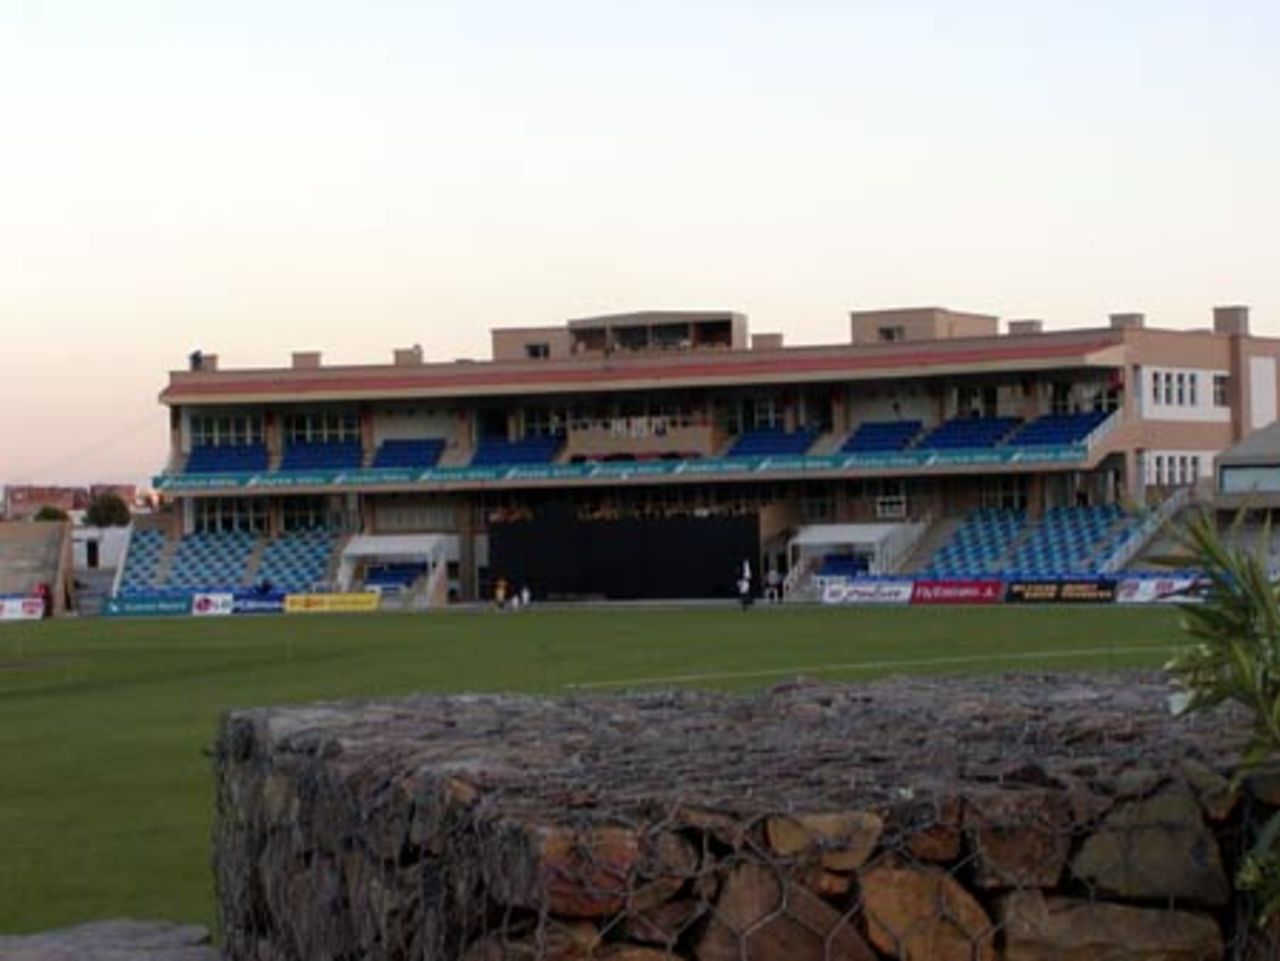 Another view of stadium, Morocco Cup, Final ODI at Tangiers, South Africa v Sri Lanka, 21 Aug 2002